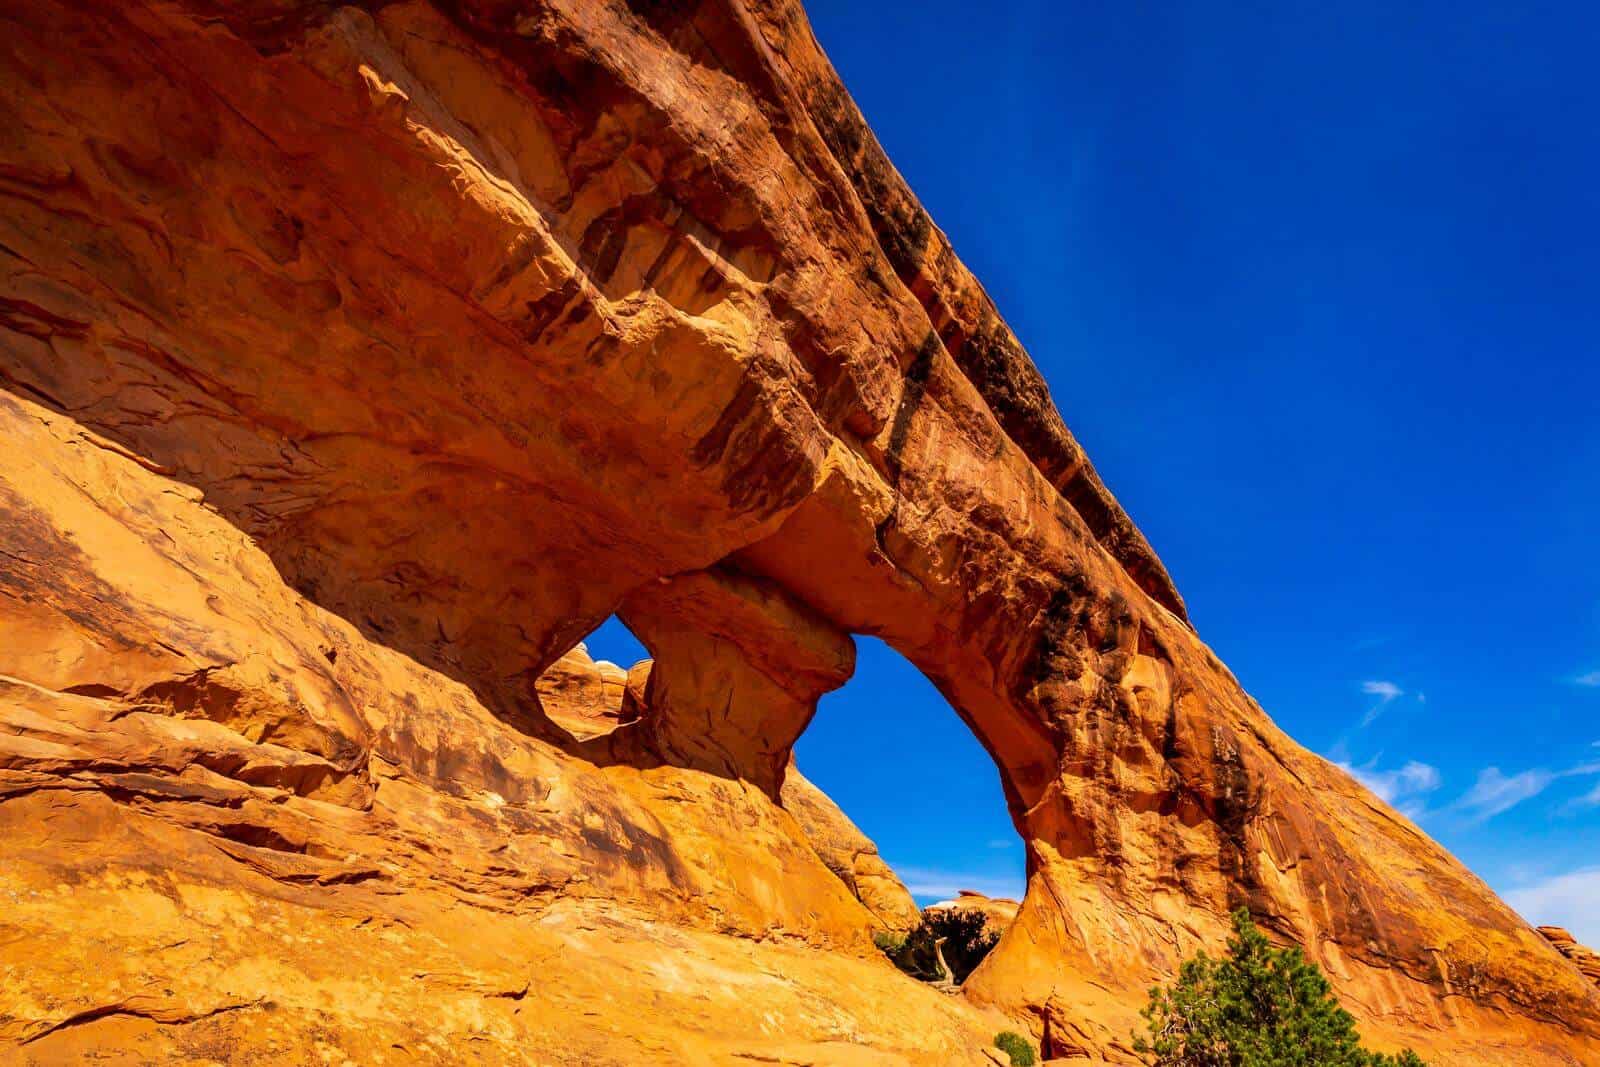 Summer in Arches National Park